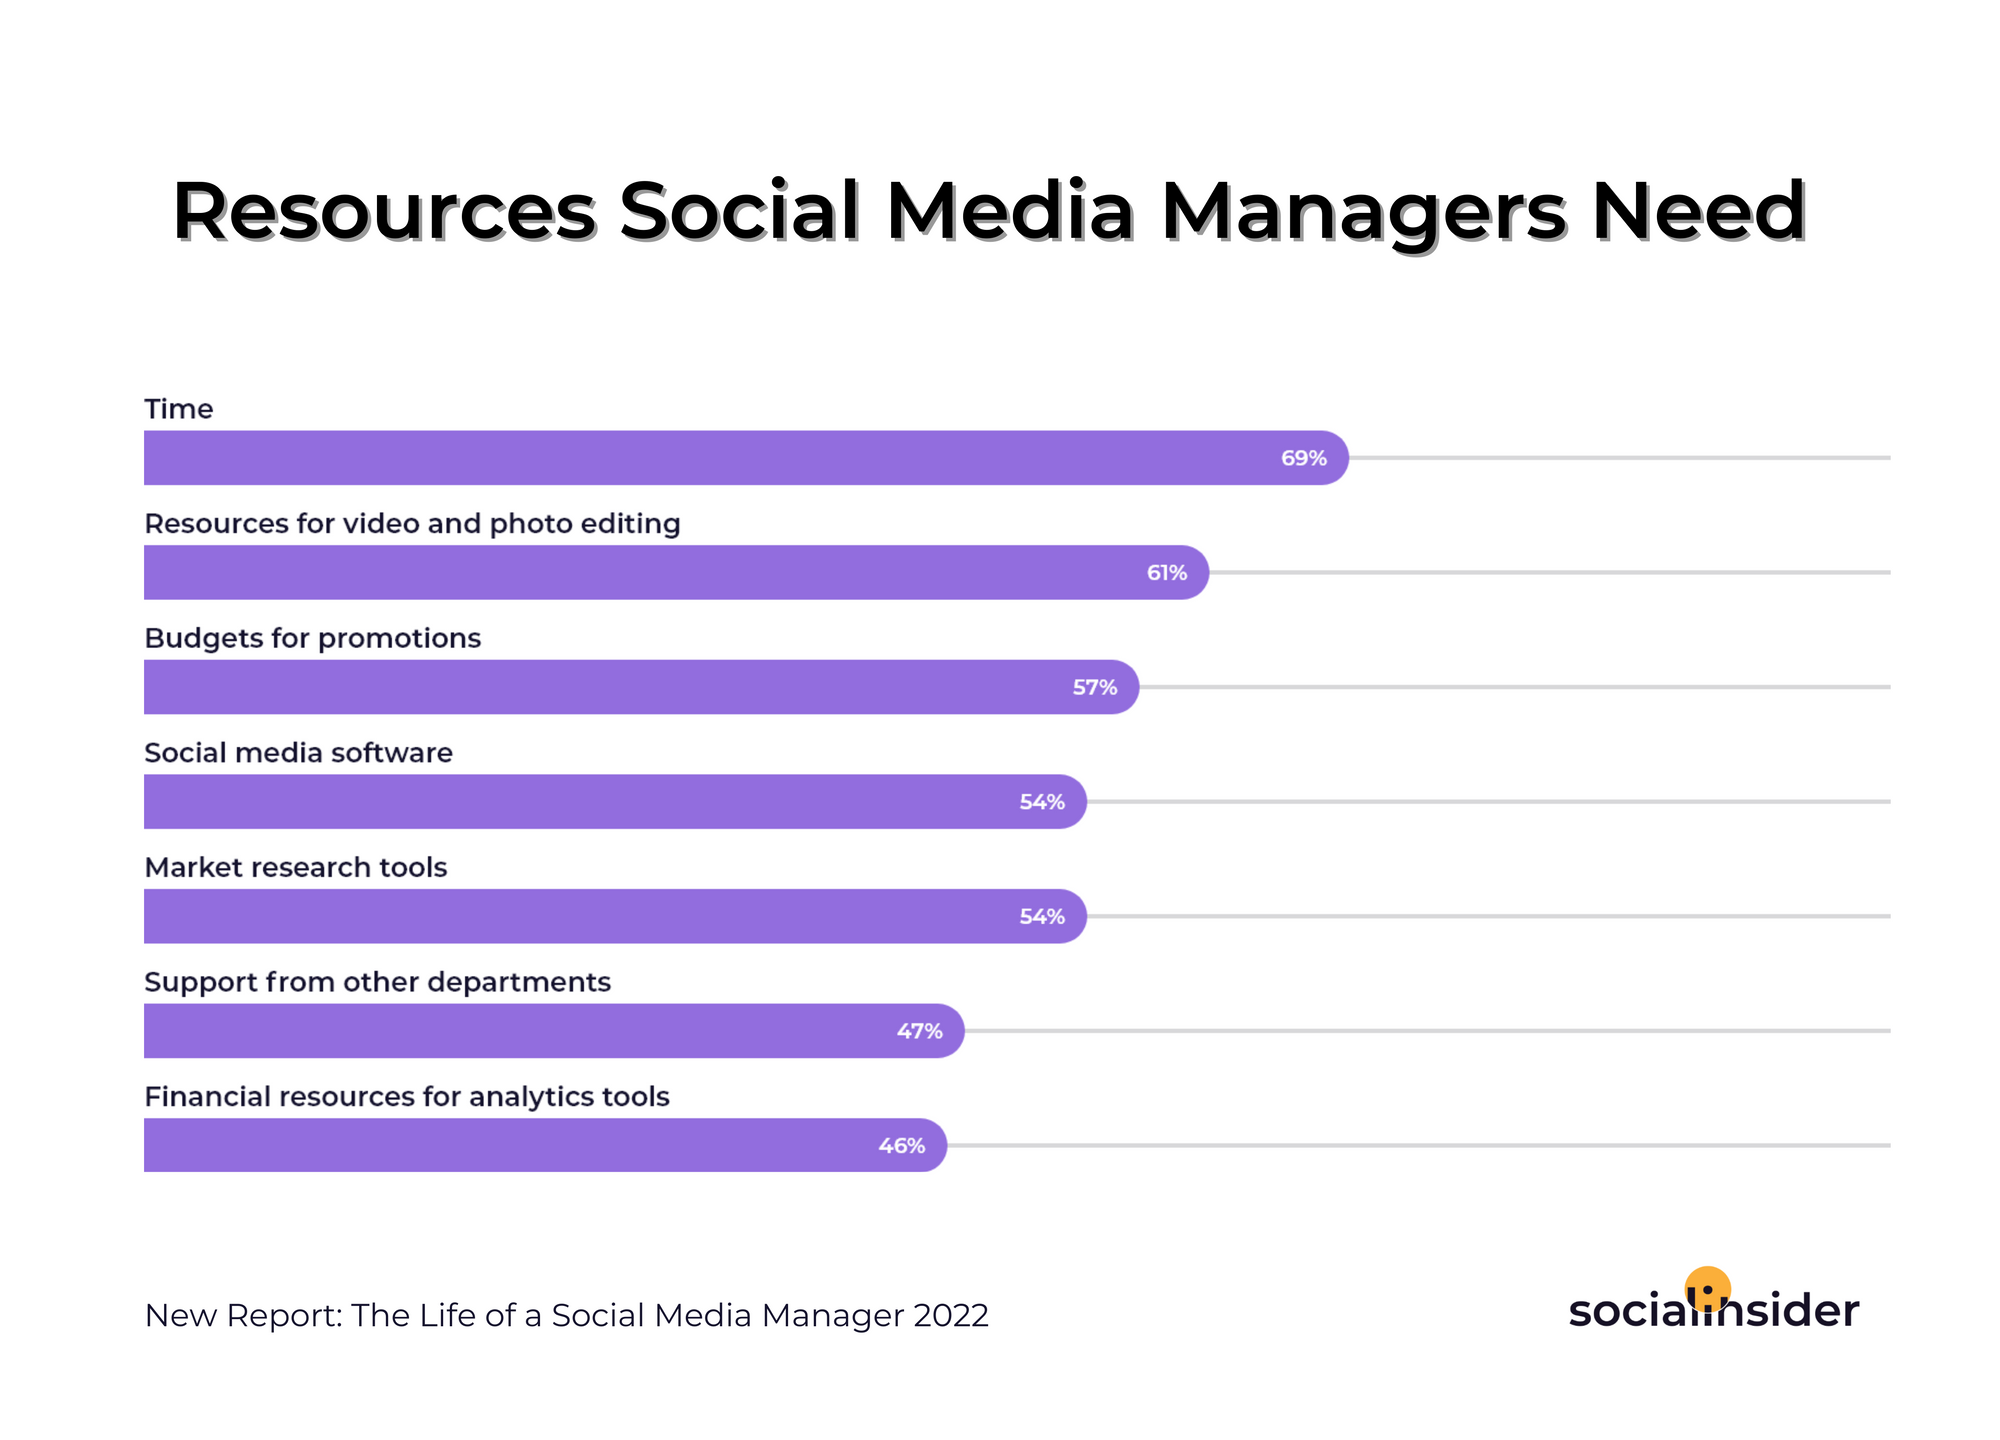 Infographic on Resources Social Media Managers Need—Extract from The Life of a Social Media Manager Report 2022